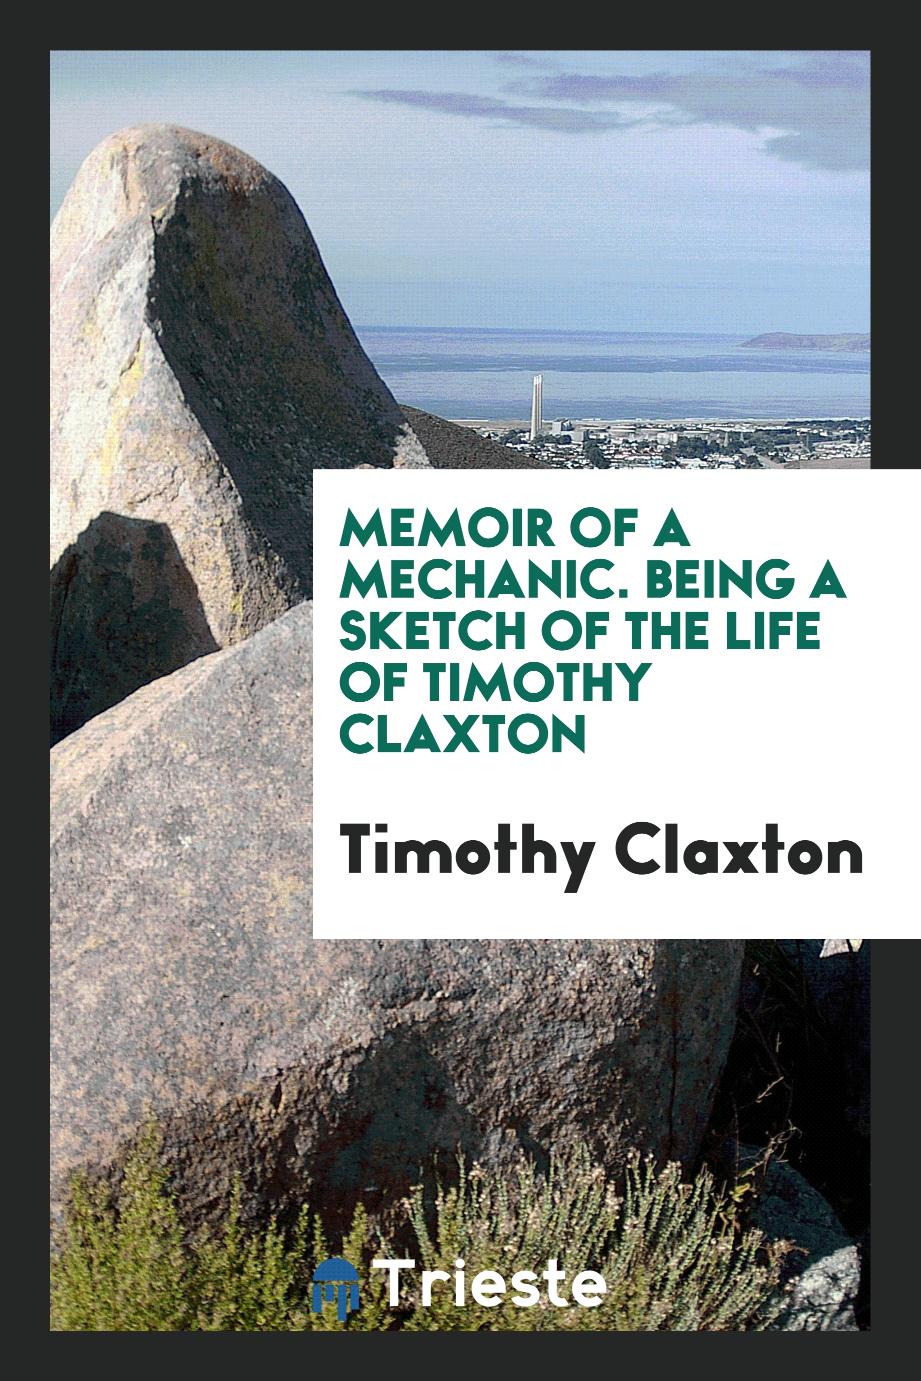 Memoir of a mechanic. Being a sketch of the life of Timothy Claxton